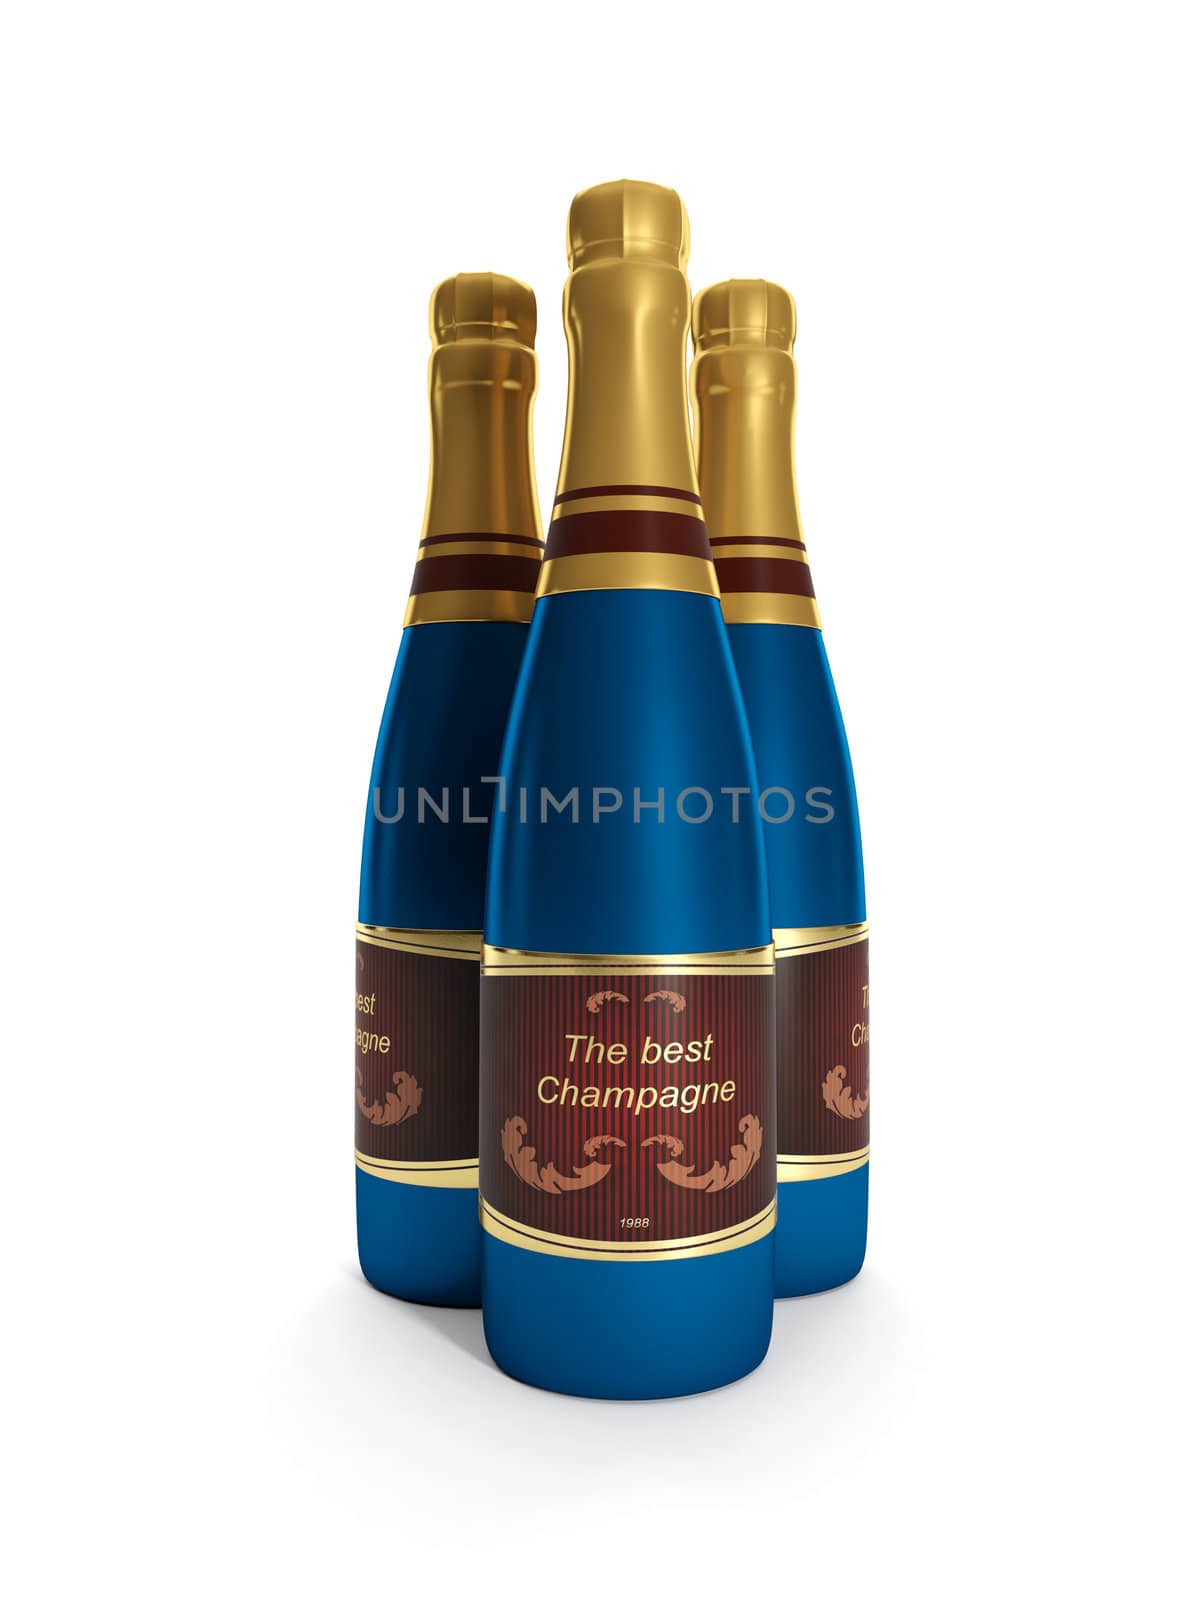 3d Illustration: A group of three bottles of champagne.